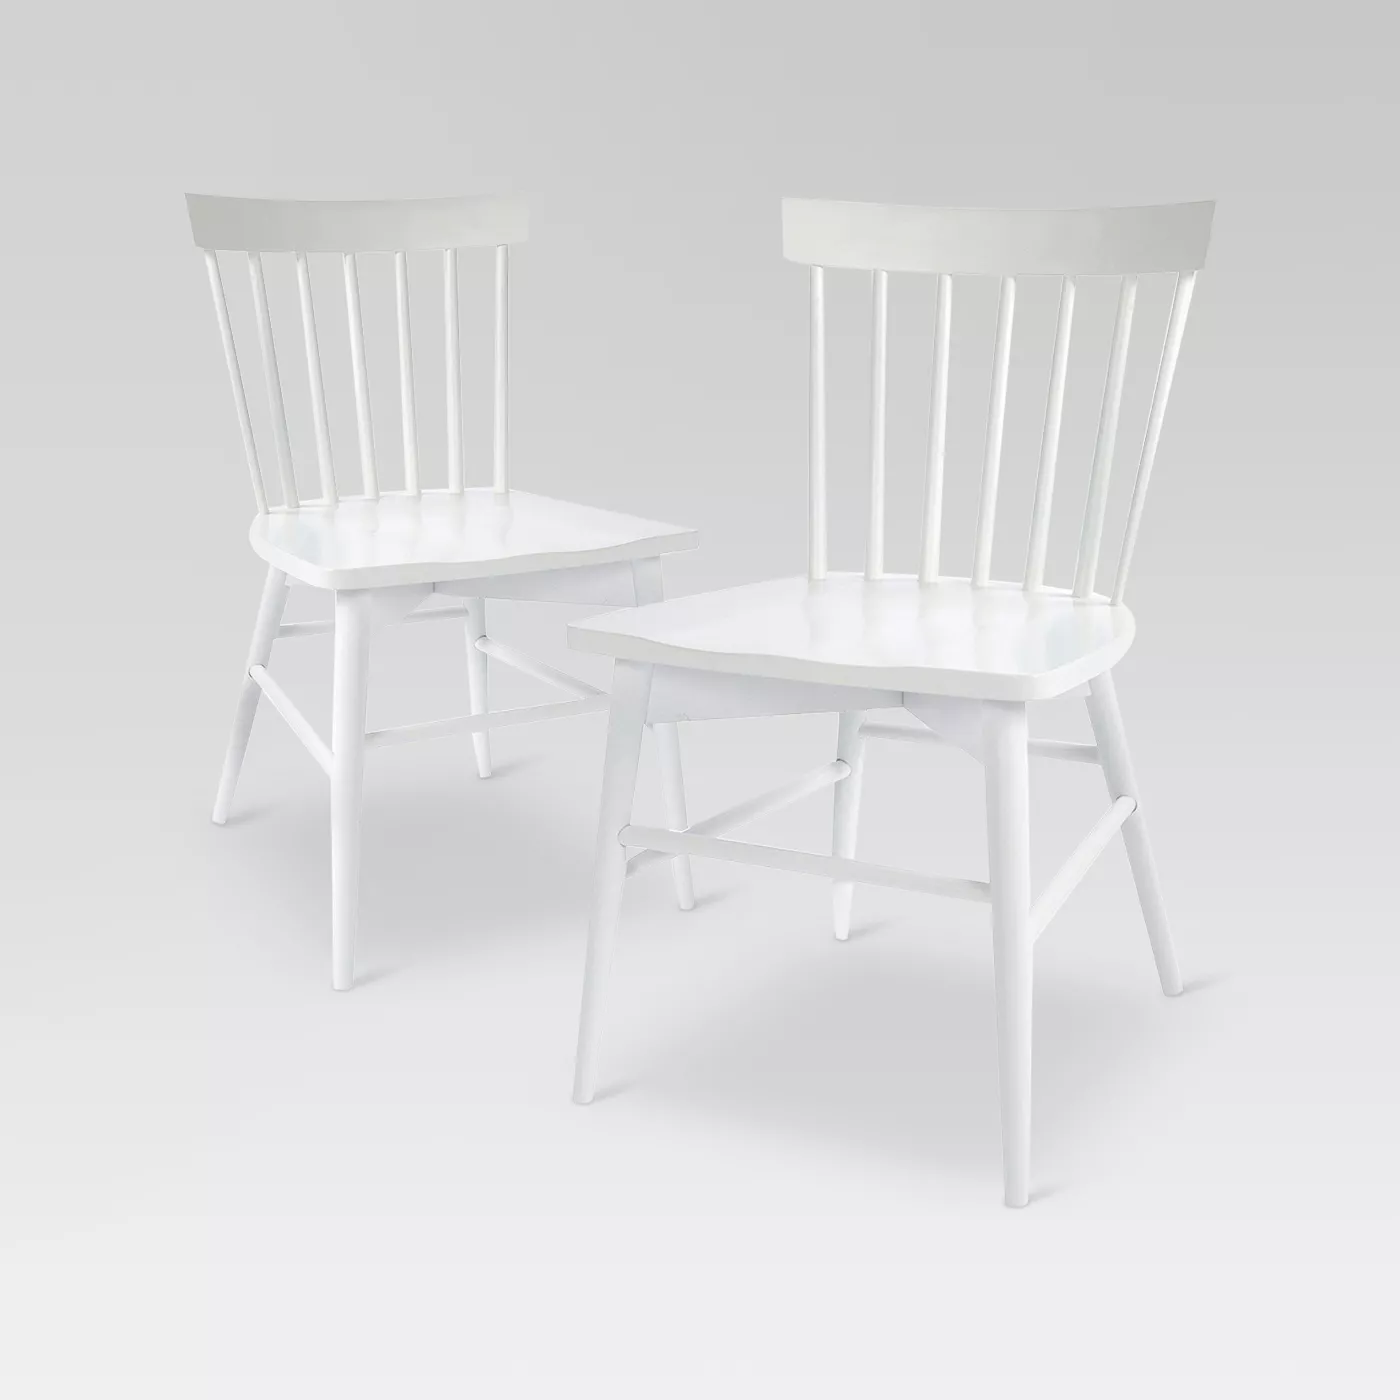 Shop Set of 2 Windsor Dining Chair - Threshold from Target on Openhaus